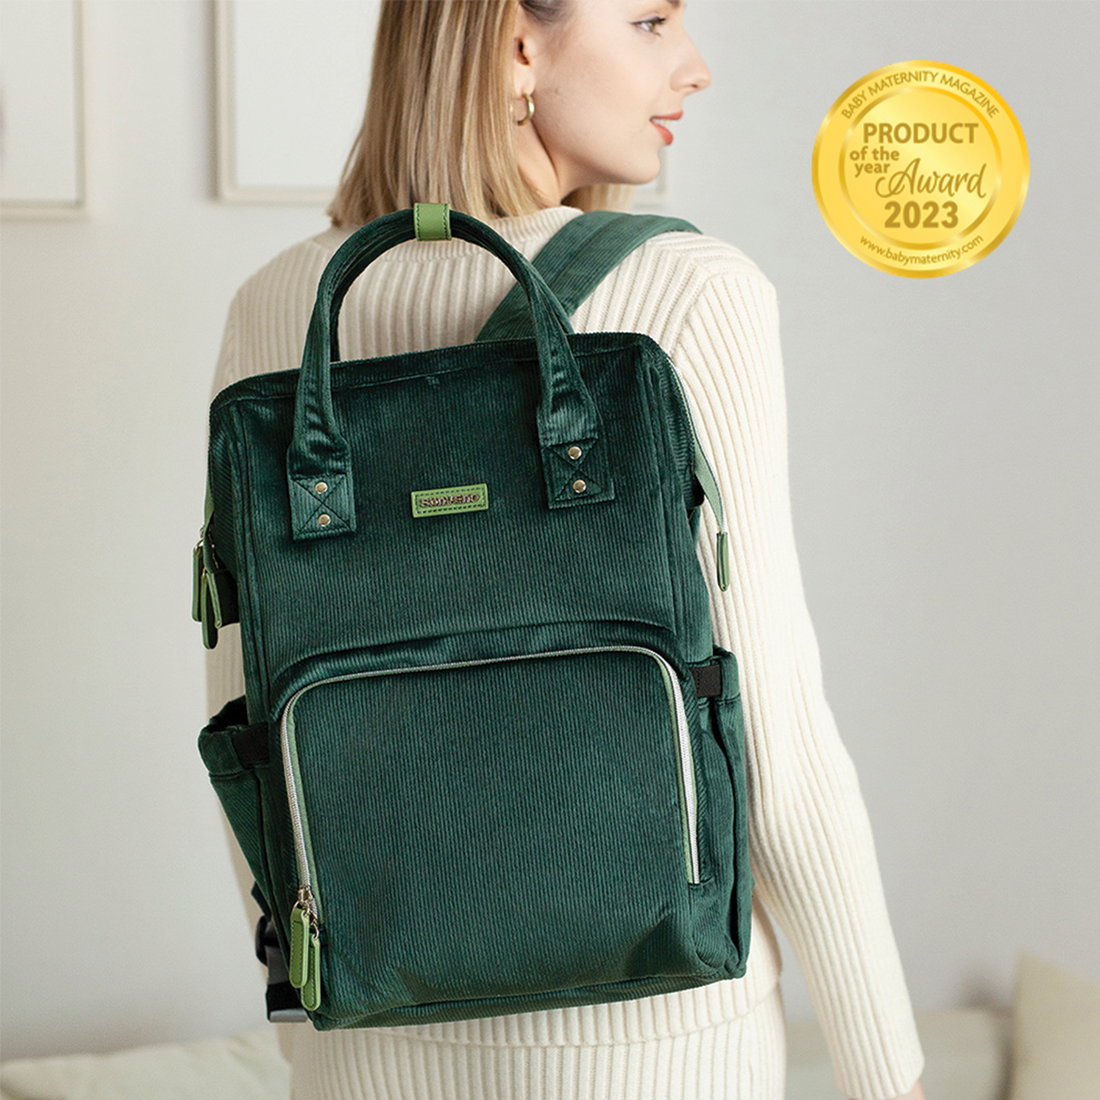 Corduroy Diaper Backpack: 2023's Product of the Year Winner!